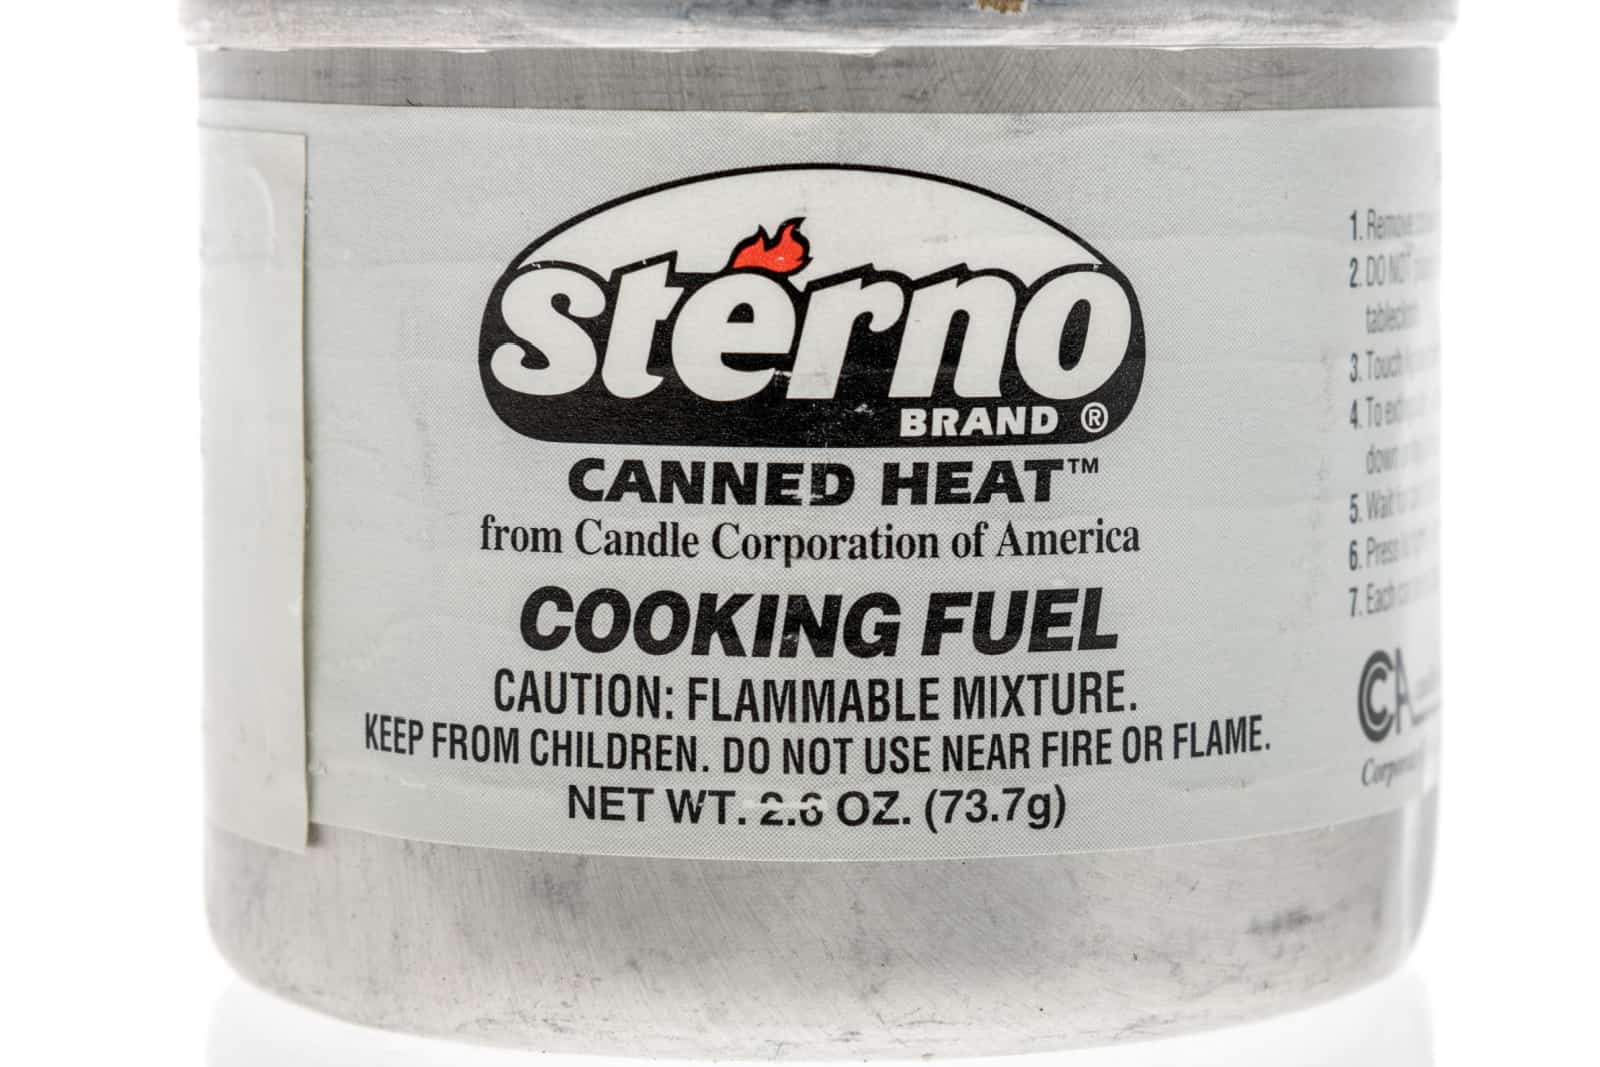 A package of Sterno burning can for heating food on an isolated background.